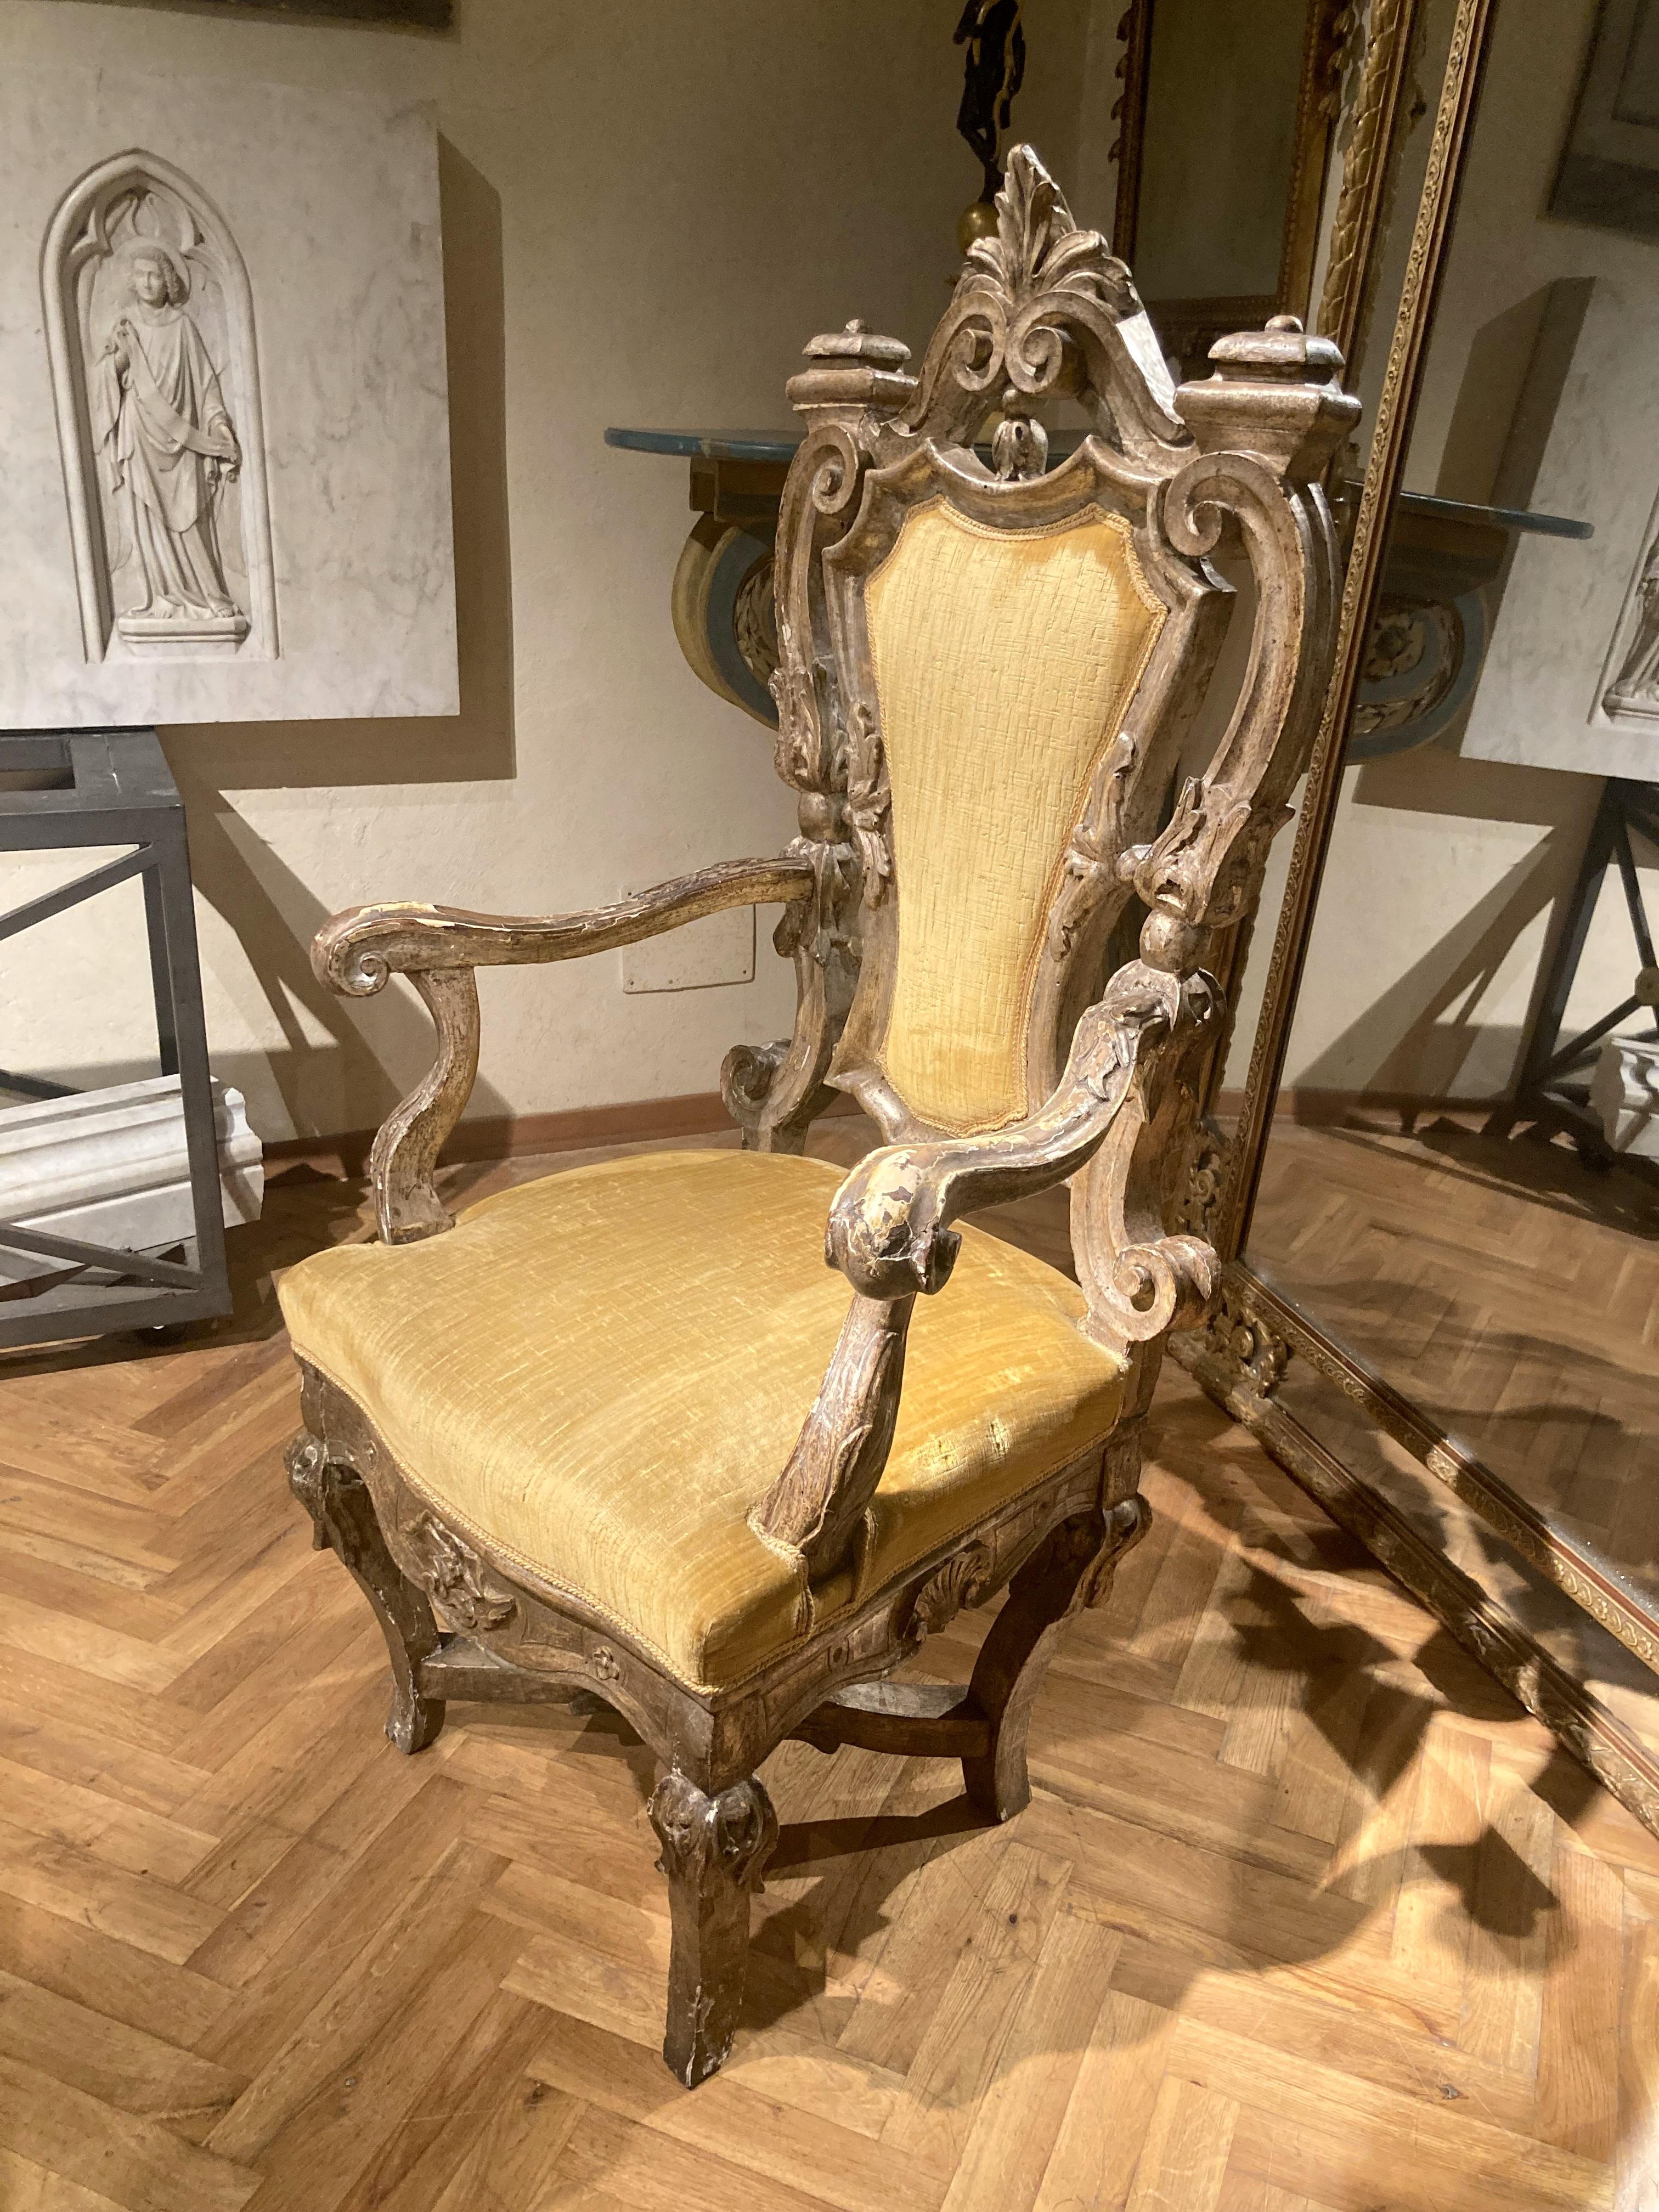 Upholstery Italian Baroque Silver Mecca Giltwood Throne Armchair, Rome 17th Century For Sale